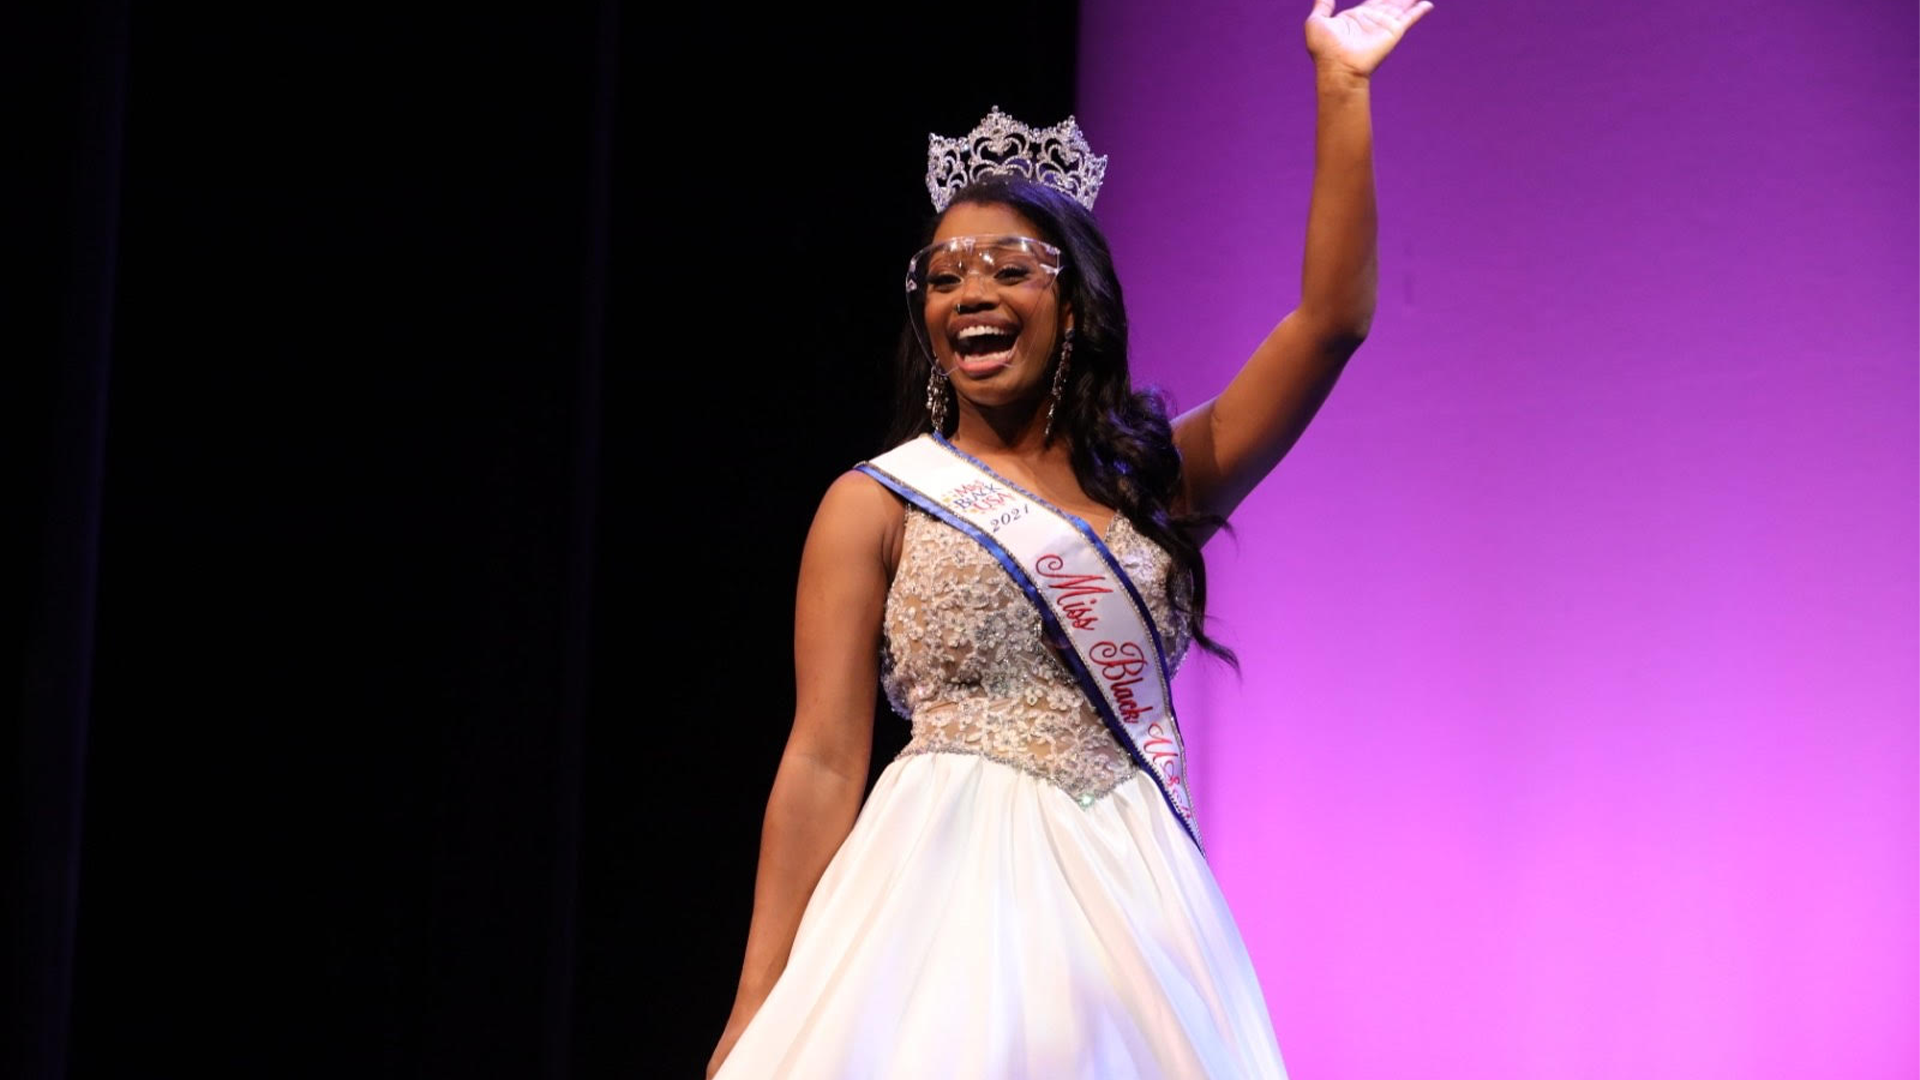 Former Miss Black USA Talented Teen Launches Full-Ride Scholarship For Her Successor